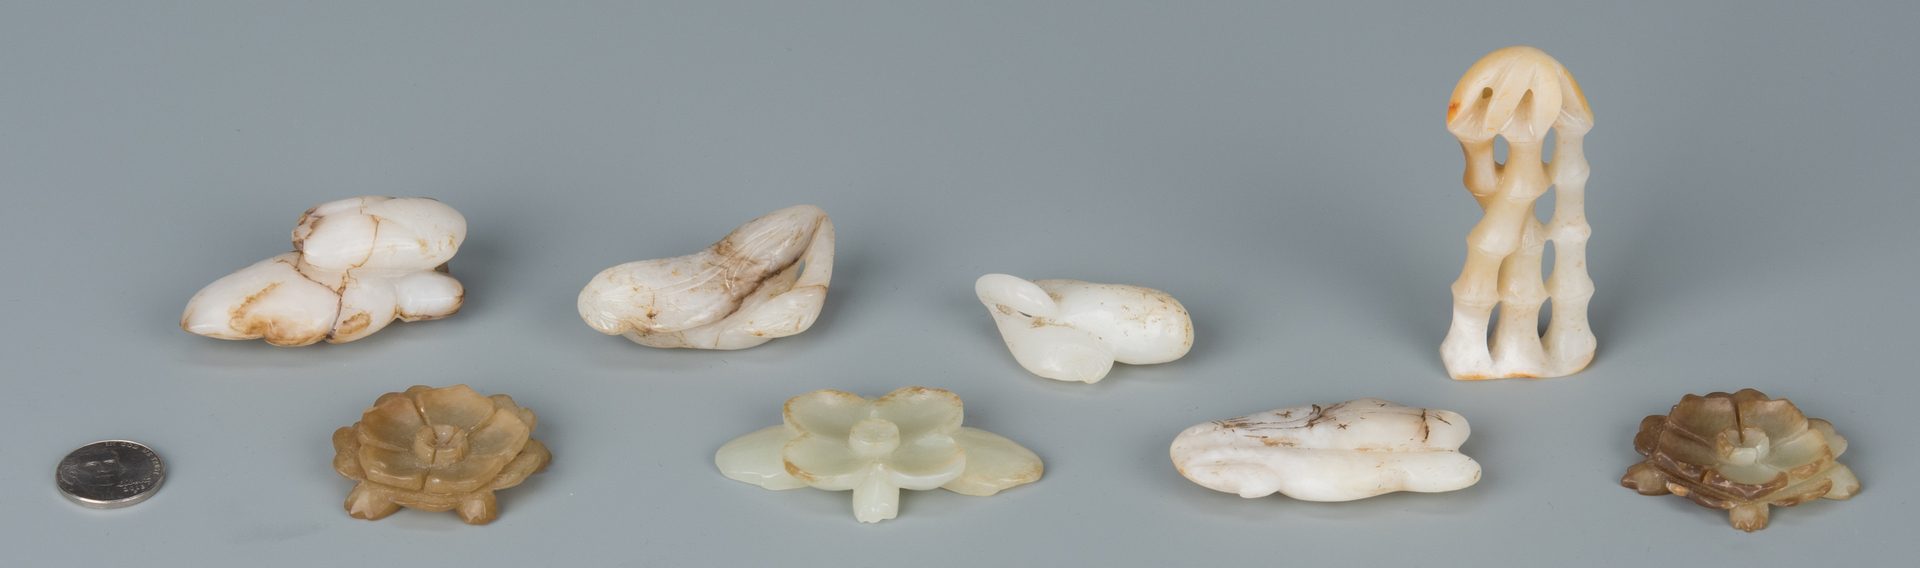 Lot 187: 8 Chinese Jade Carved Toggles